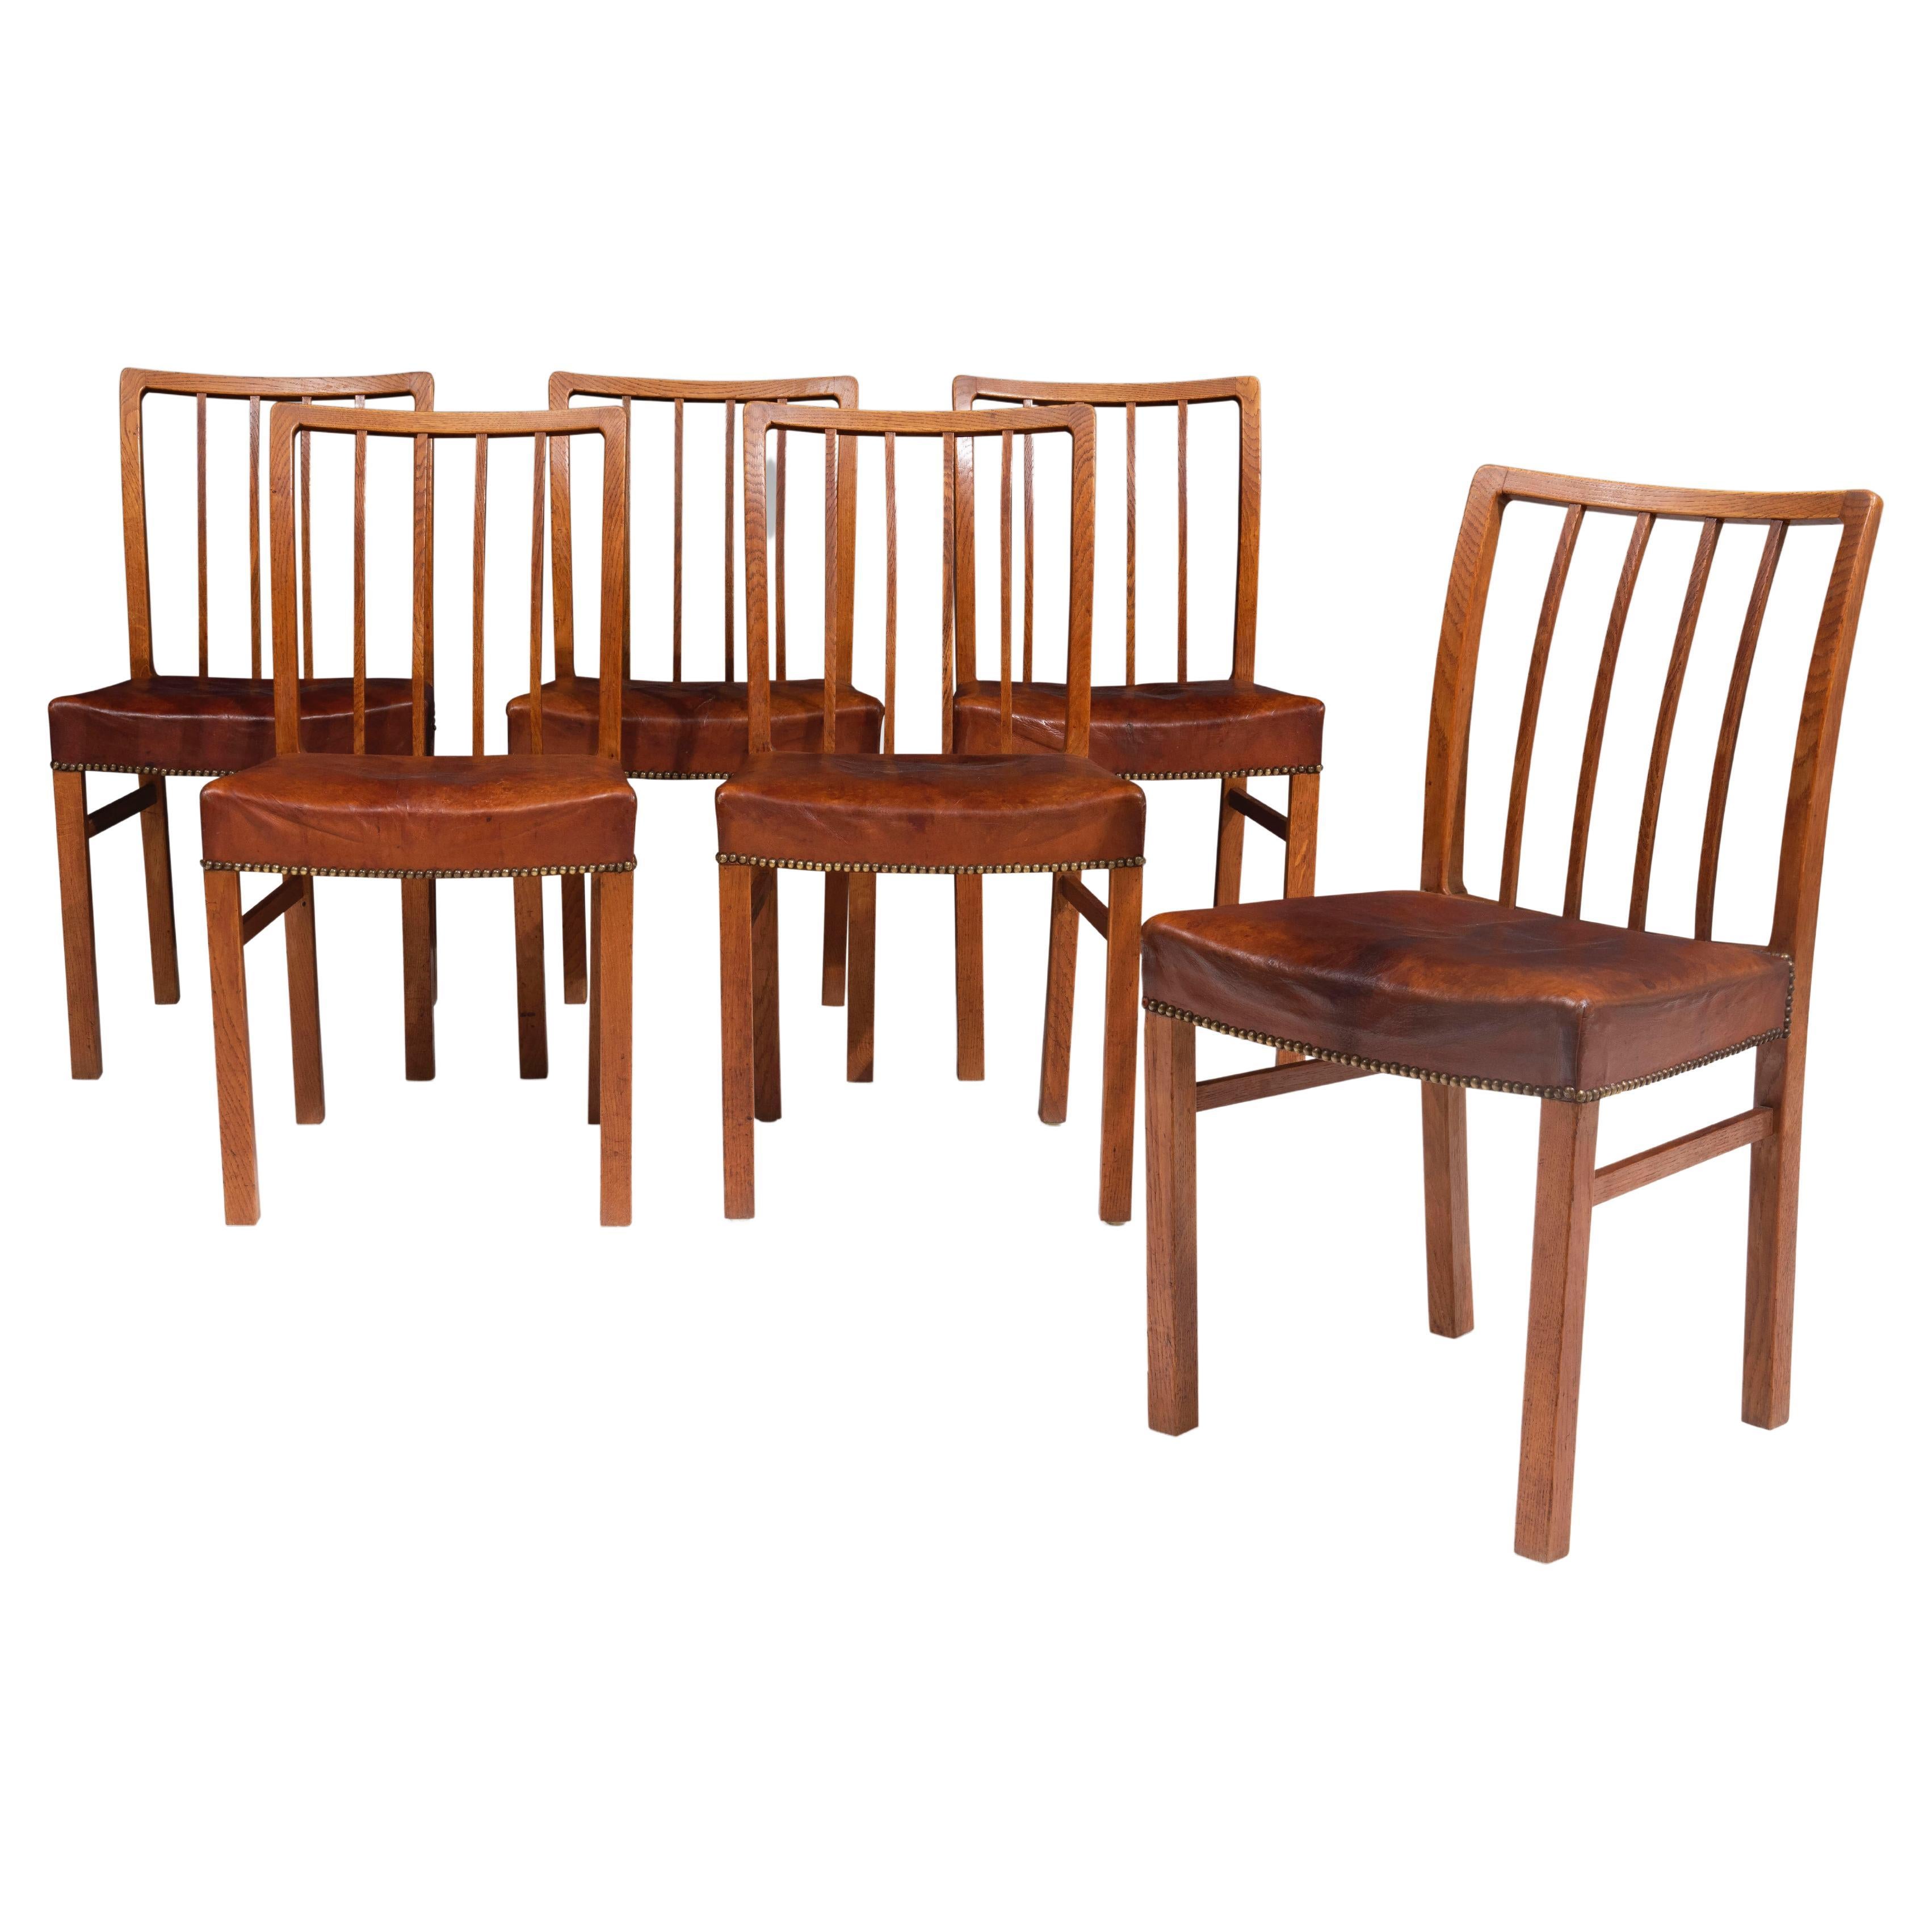 Jacob Kjaer set of 6 dining chairs Oak and original Niger leather, 1930's